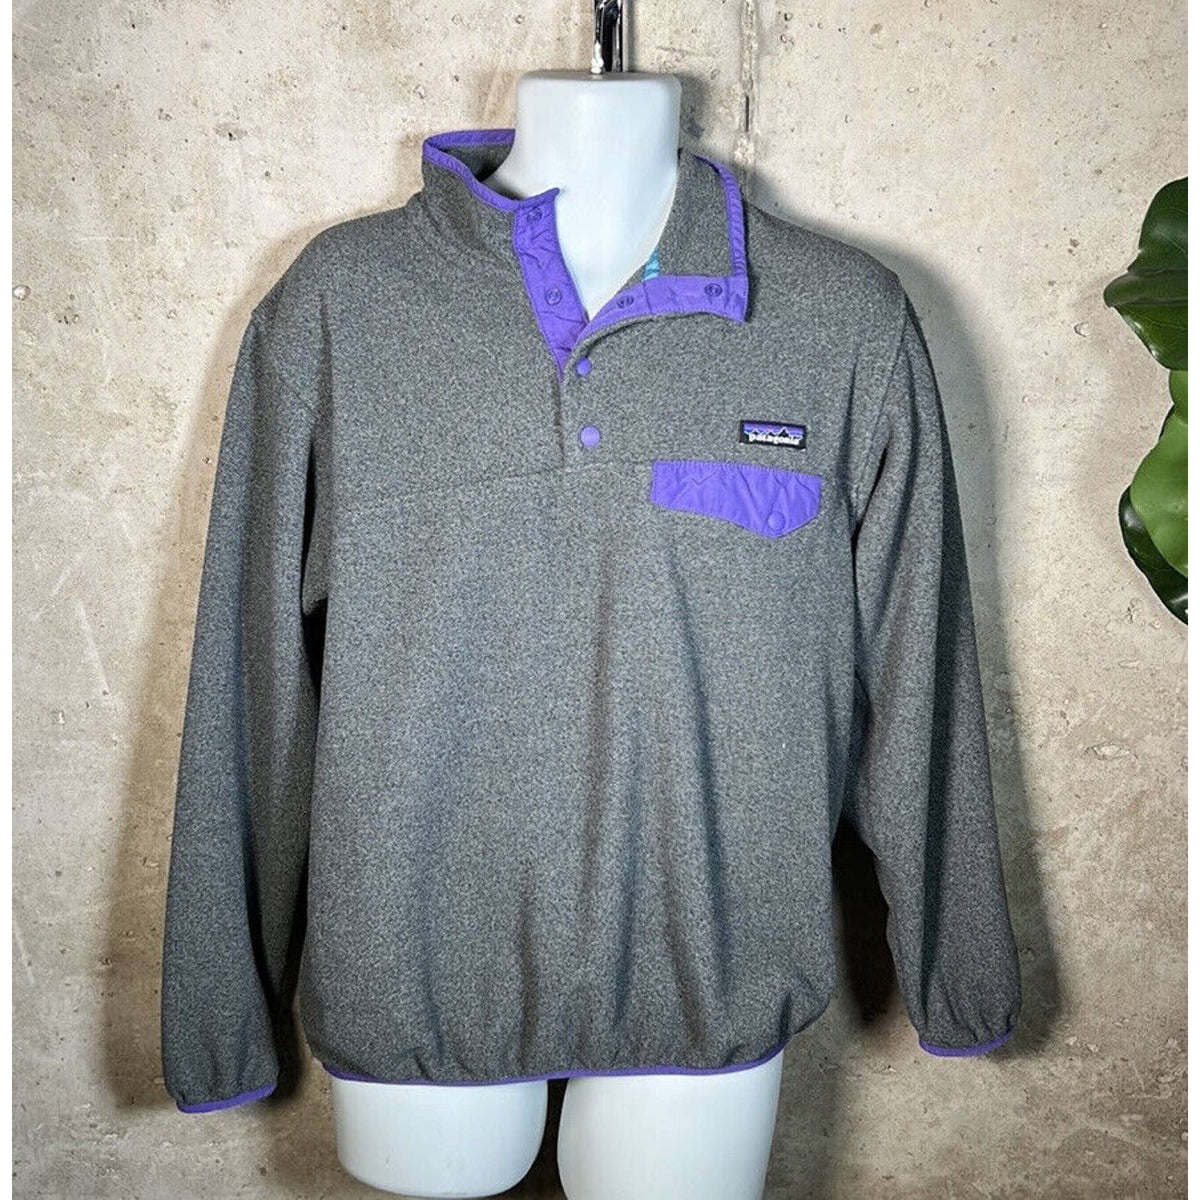 Patagonia Synchilla Women’s Grey and Purple Fleece Button Up Sz. Large